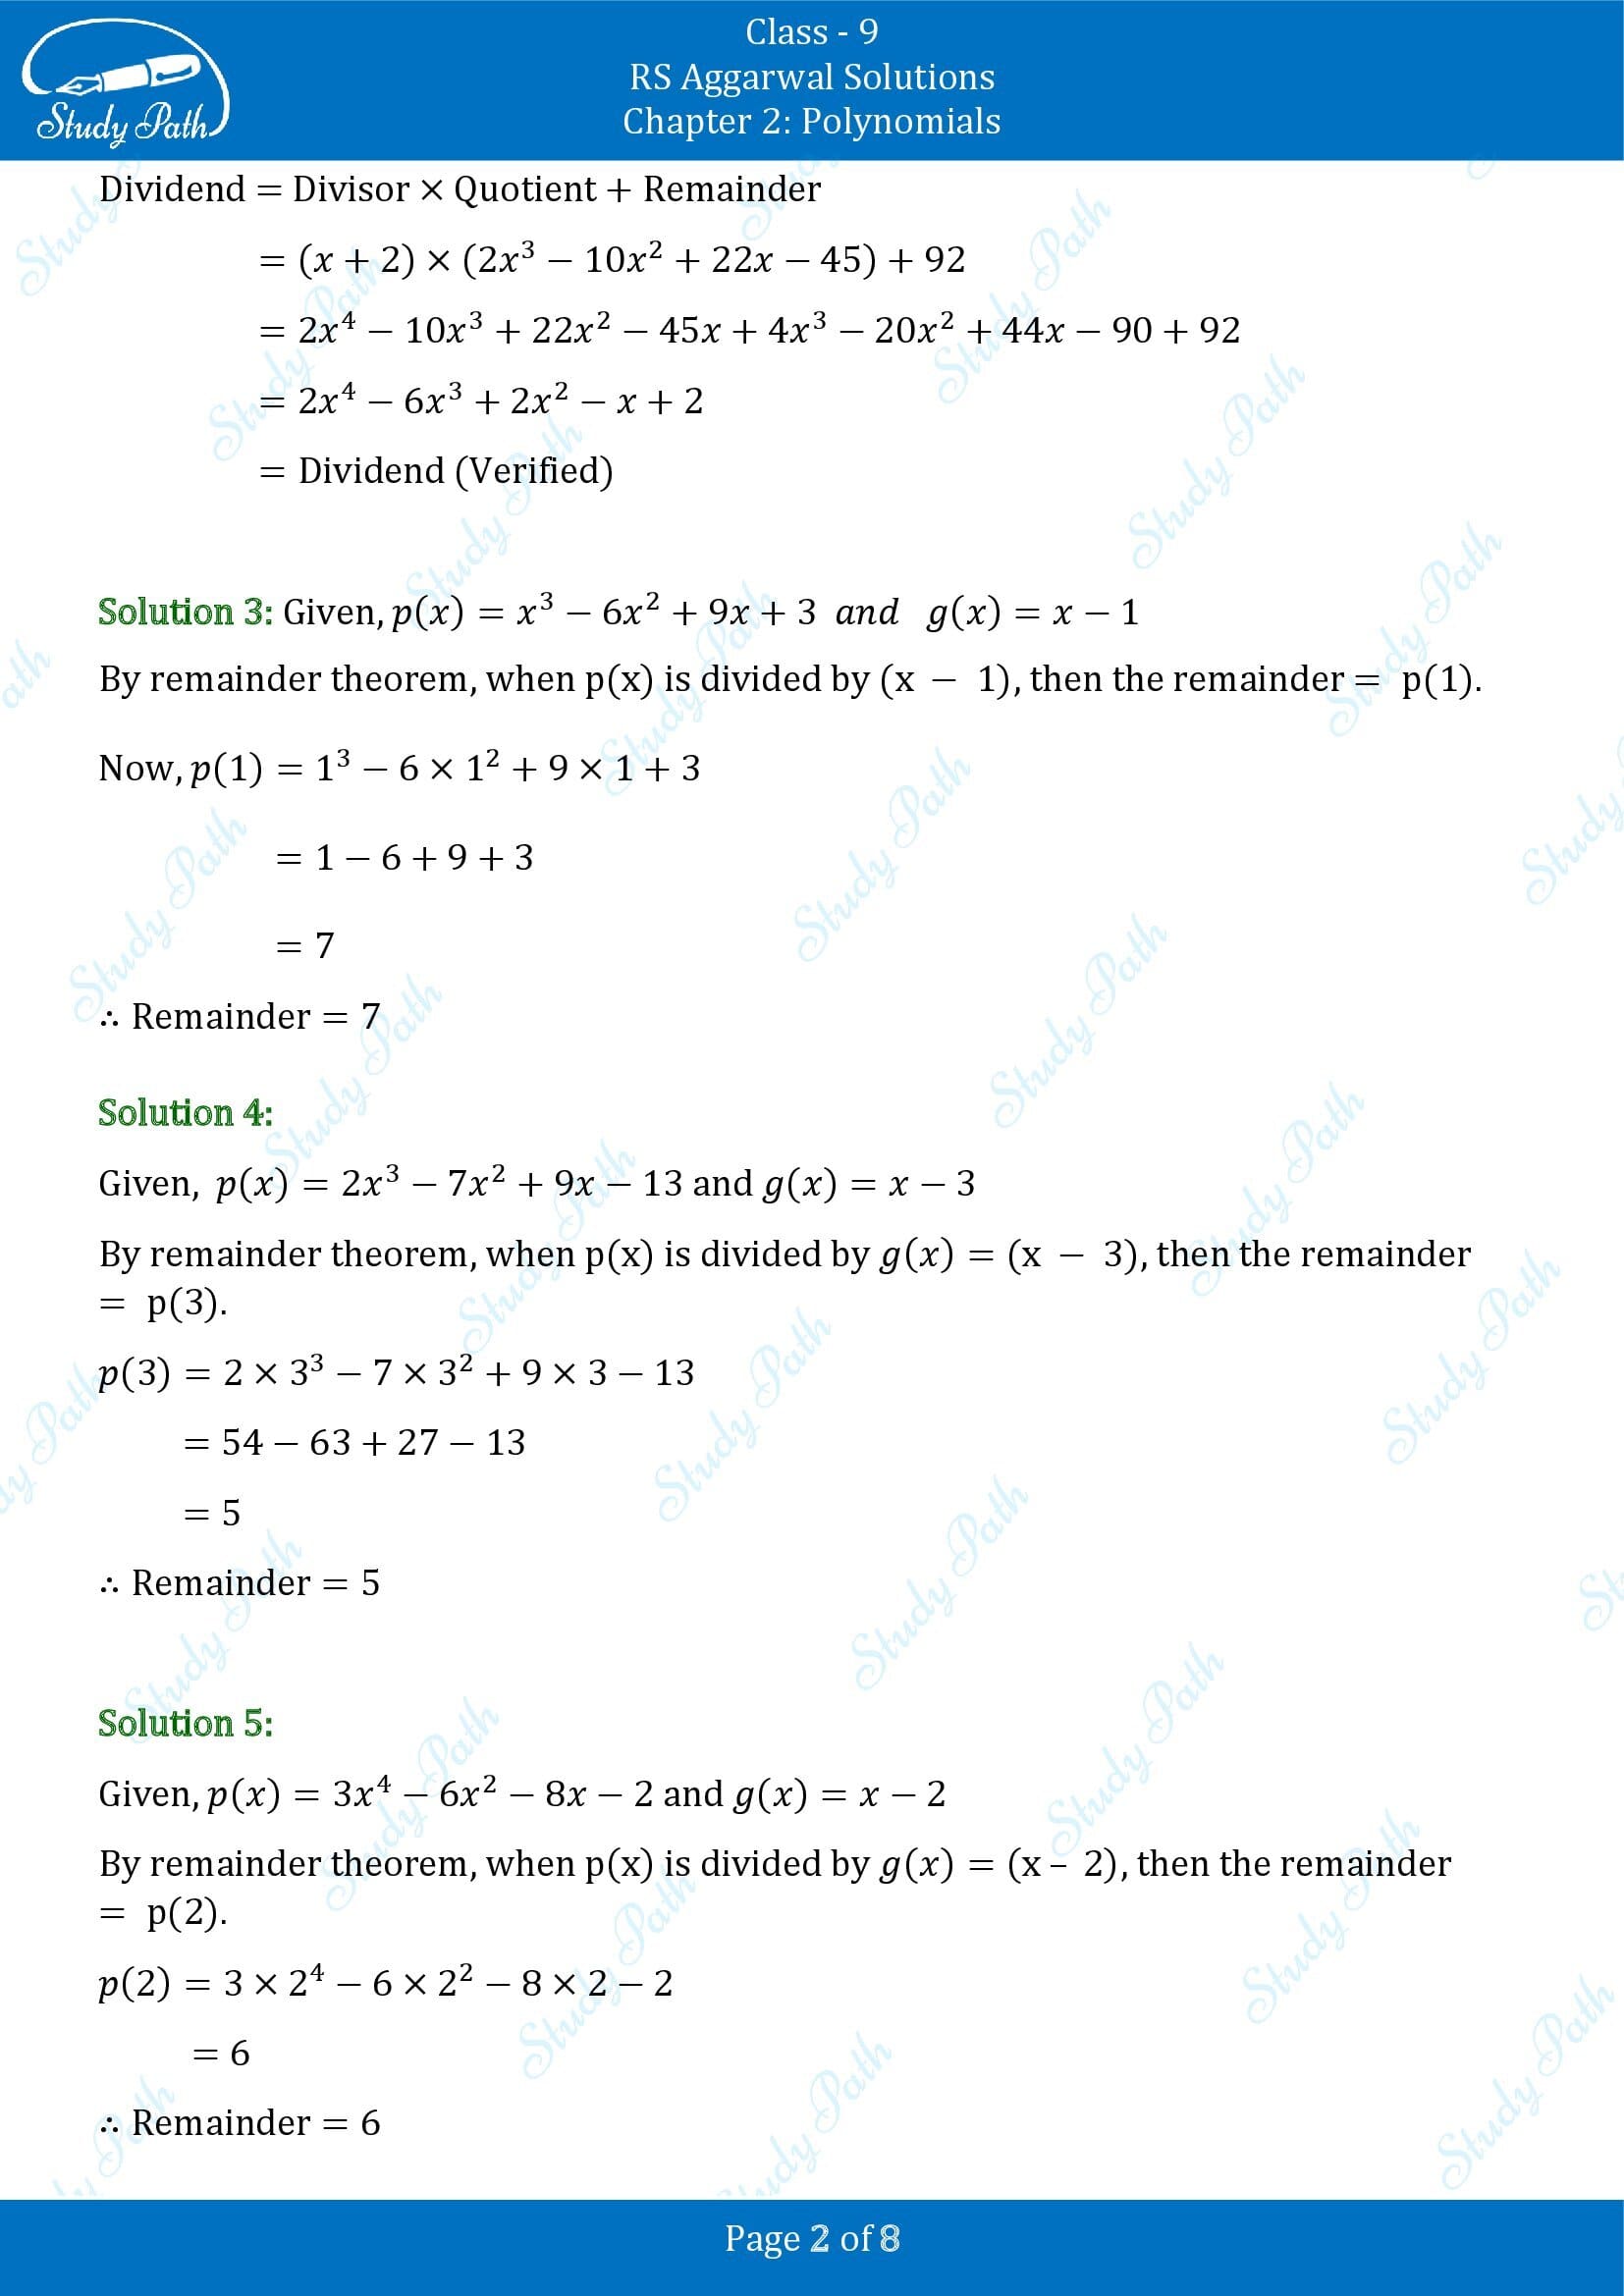 RS Aggarwal Solutions Class 9 Chapter 2 Polynomials Exercise 2C 00002